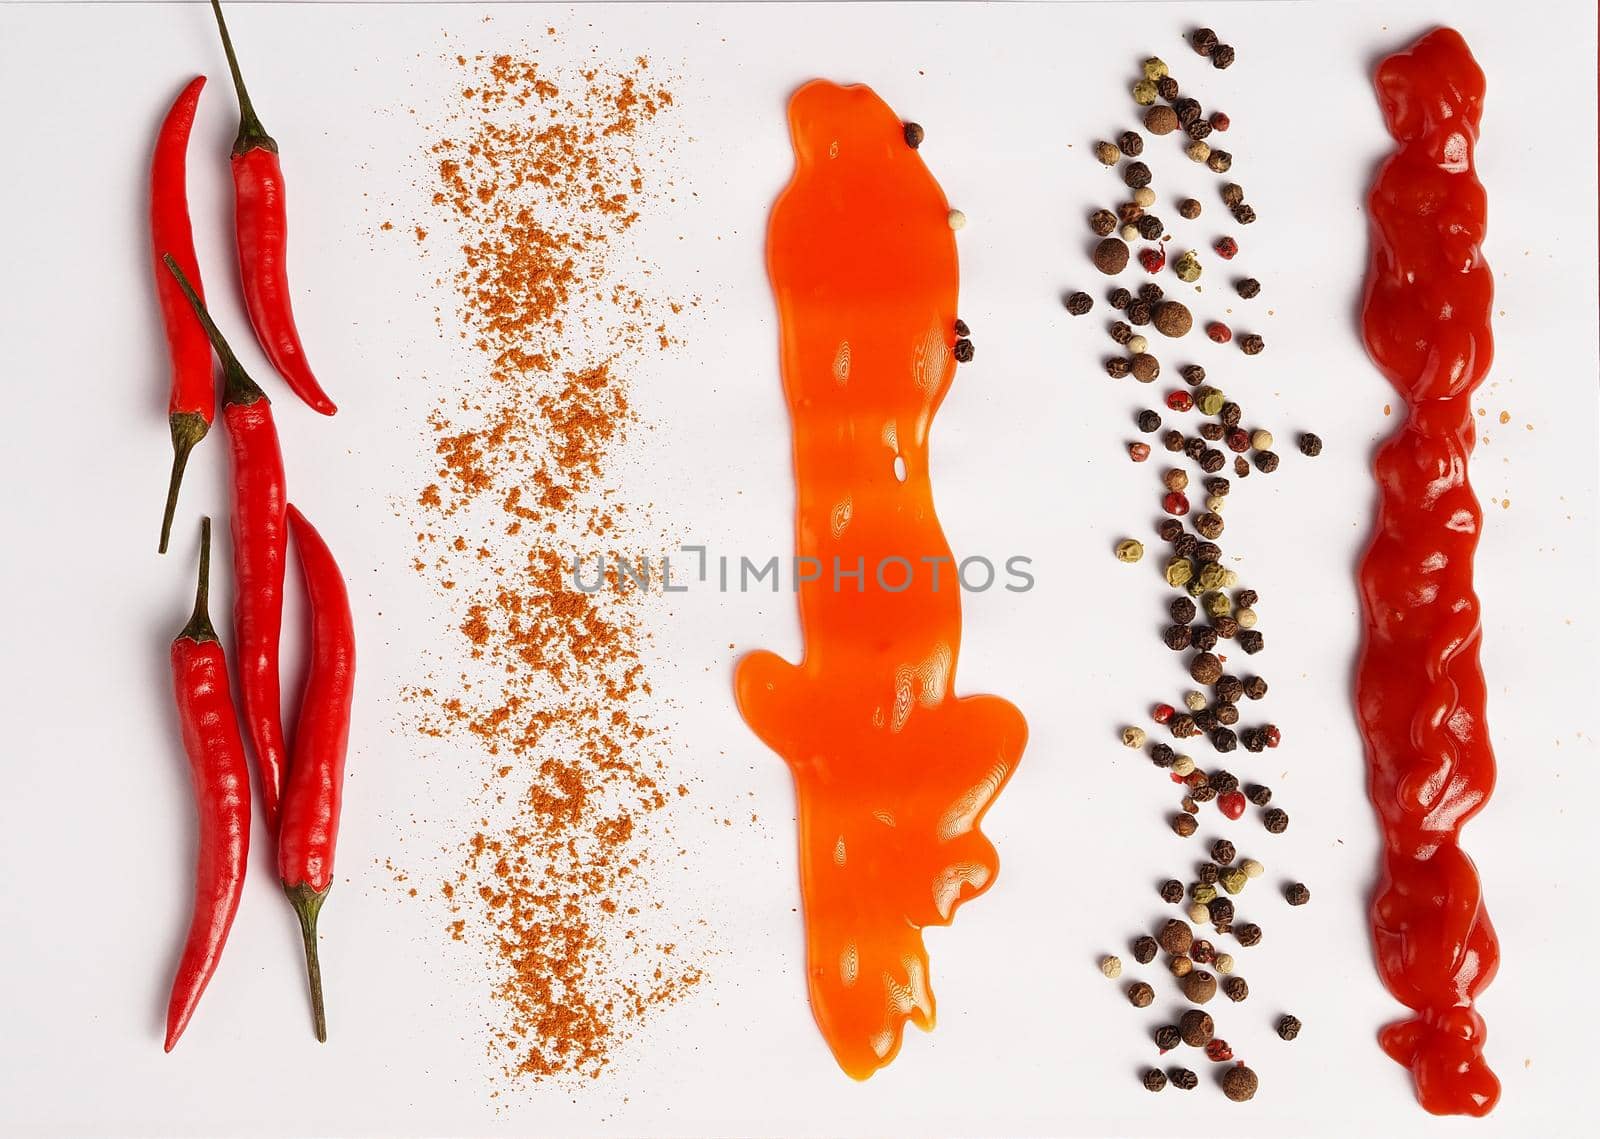 Chili peppers, spices and sauces on a white background. close-up. by Olga26